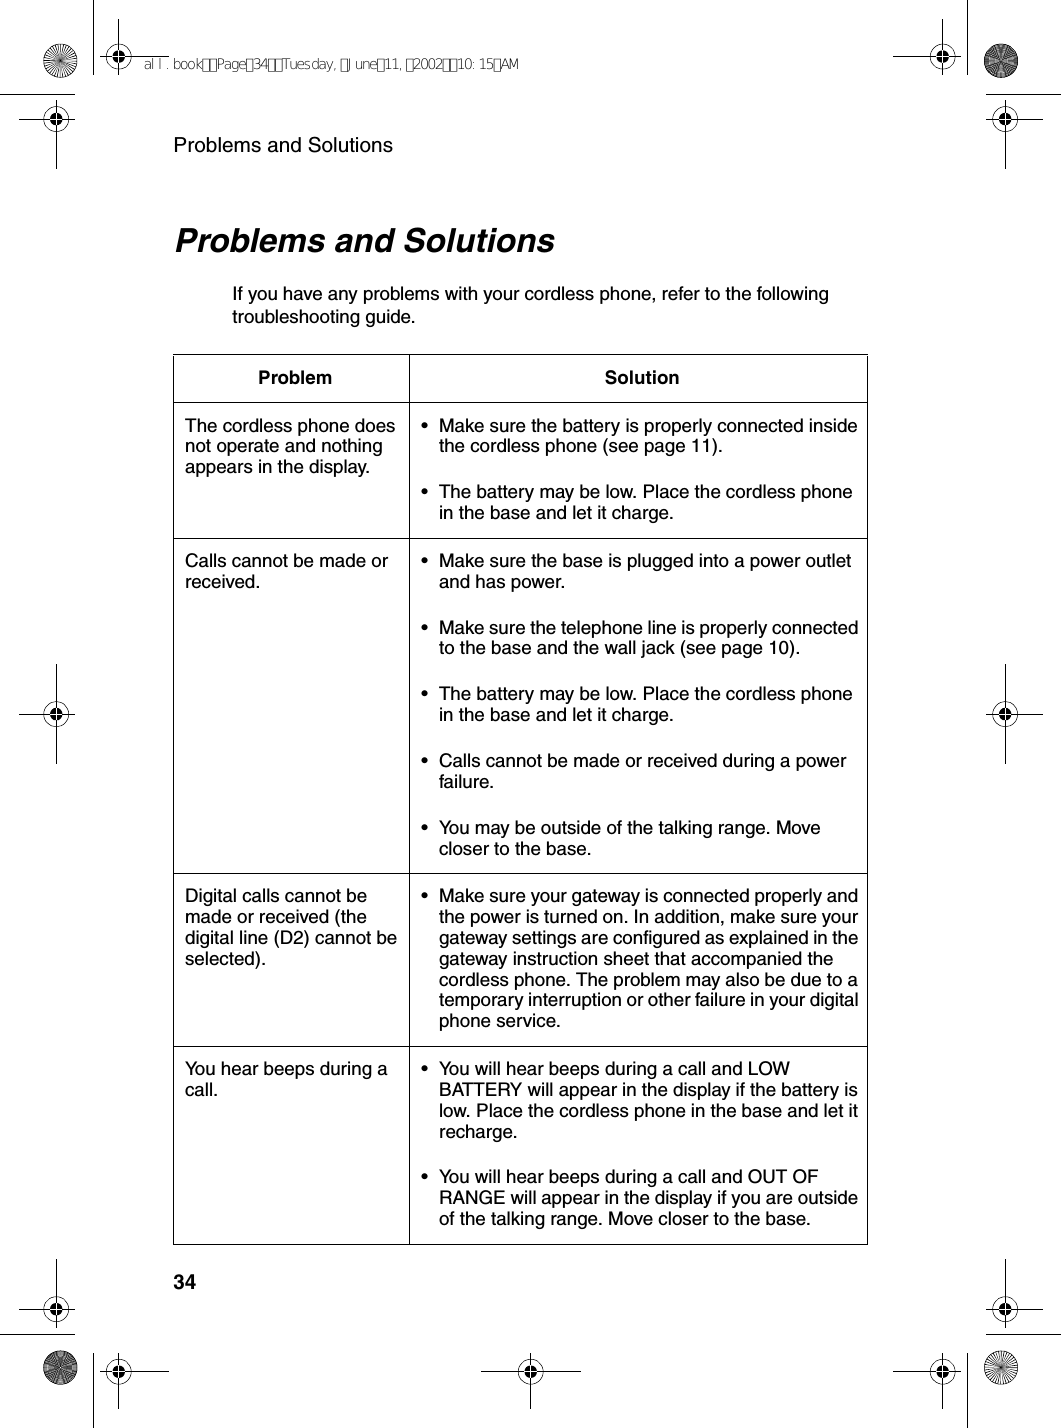 Problems and Solutions34Problems and SolutionsIf you have any problems with your cordless phone, refer to the following troubleshooting guide.Problem SolutionThe cordless phone does not operate and nothing appears in the display.•Make sure the battery is properly connected inside the cordless phone (see page 11).•The battery may be low. Place the cordless phone in the base and let it charge.Calls cannot be made or received.•Make sure the base is plugged into a power outlet and has power.•Make sure the telephone line is properly connected to the base and the wall jack (see page 10).•The battery may be low. Place the cordless phone in the base and let it charge.•Calls cannot be made or received during a power failure.•You may be outside of the talking range. Move closer to the base.Digital calls cannot be made or received (the digital line (D2) cannot be selected).•Make sure your gateway is connected properly and the power is turned on. In addition, make sure your gateway settings are configured as explained in the gateway instruction sheet that accompanied the cordless phone. The problem may also be due to a temporary interruption or other failure in your digital phone service.You hear beeps during a call.•You will hear beeps during a call and LOW BATTERY will appear in the display if the battery is low. Place the cordless phone in the base and let it recharge. •You will hear beeps during a call and OUT OF RANGE will appear in the display if you are outside of the talking range. Move closer to the base.all.bookPage34Tuesday,June11,200210:15AM